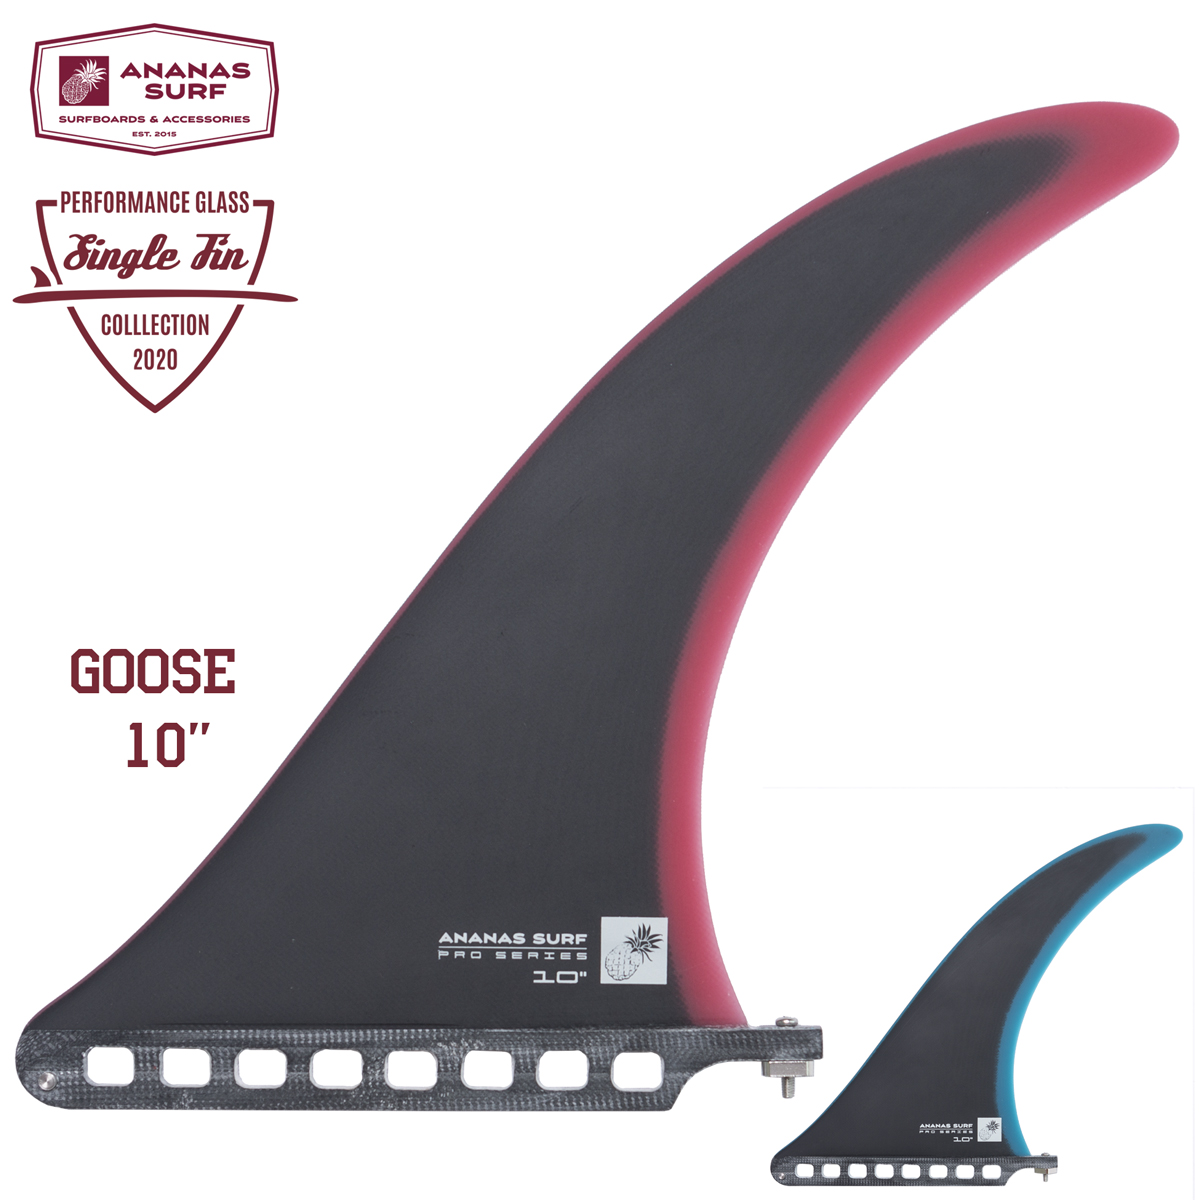 Ananas Surf Performance Glass Goose single fin 10 in